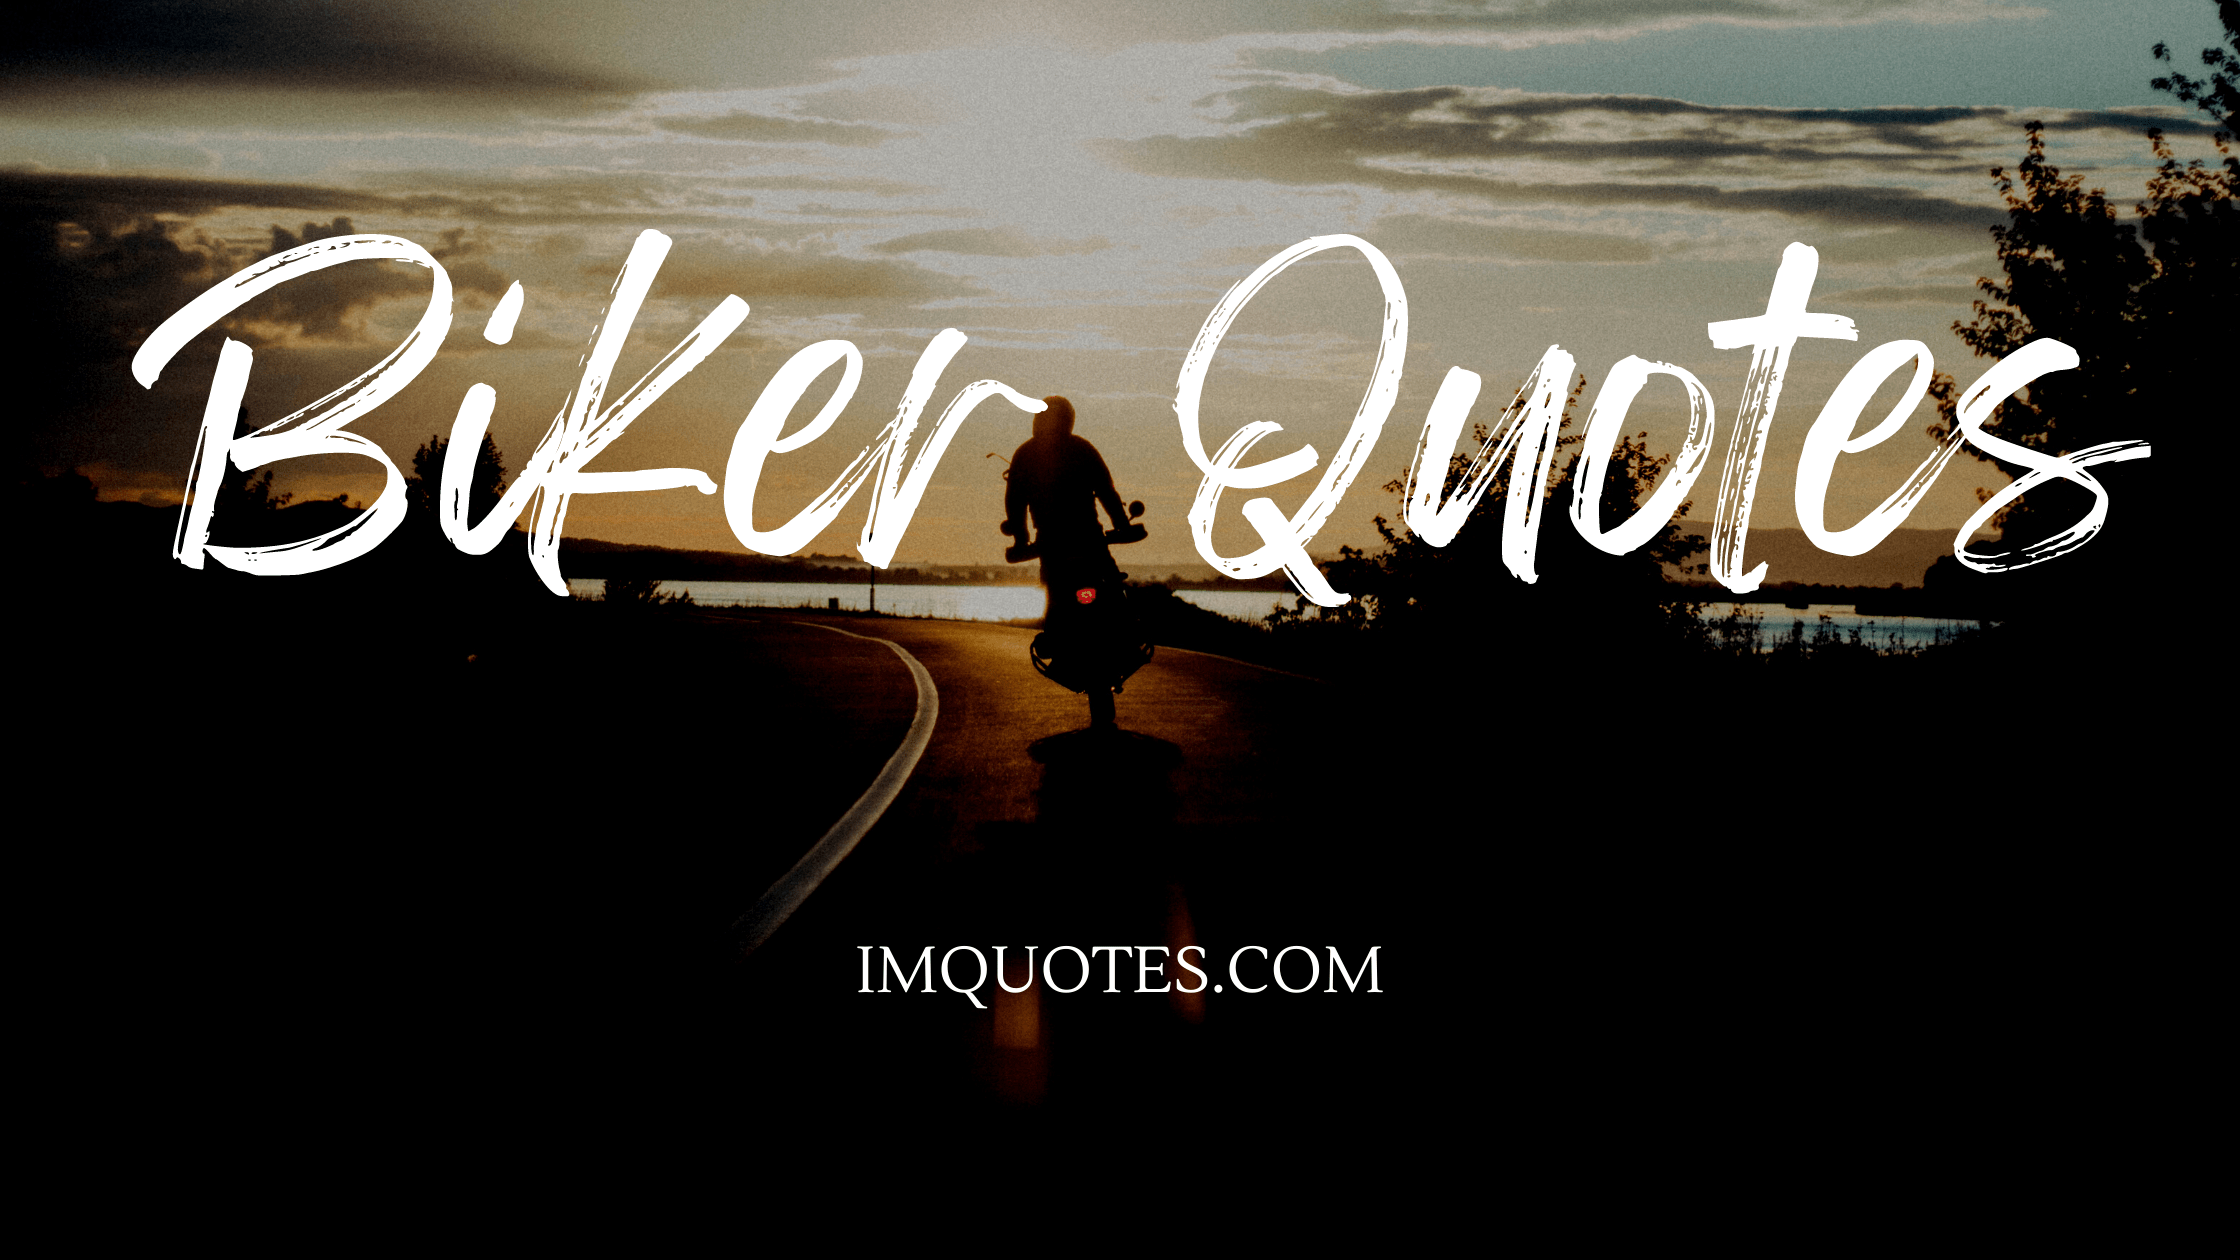 Some Motorcycle Quotes For Bikers